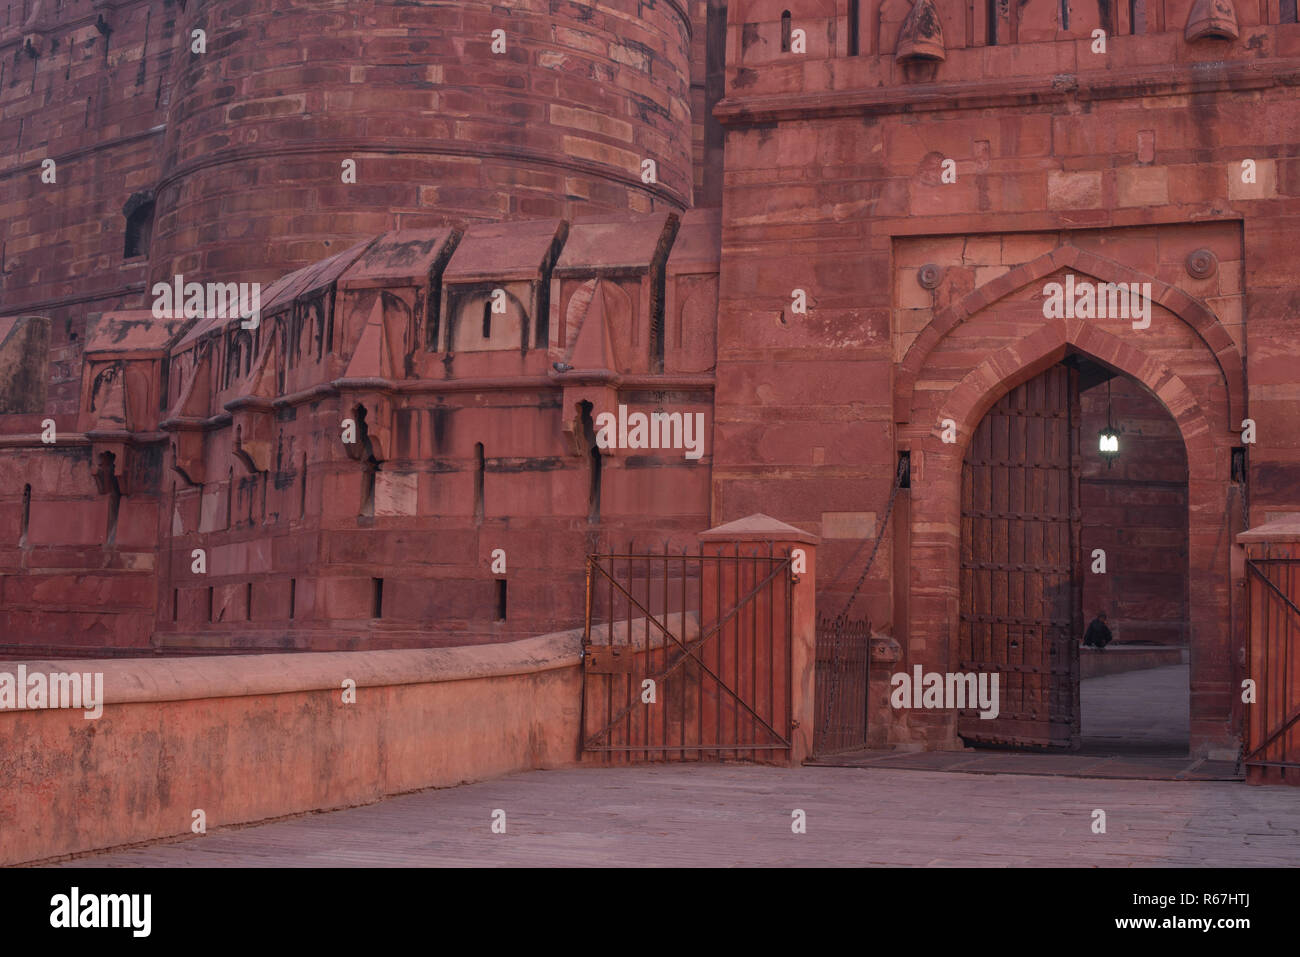 The entrance of Agra Fort also called as the Red Fort the residence of the Mughal Dynasty with amazing mughal architecture made of red stones at dawn  Stock Photo